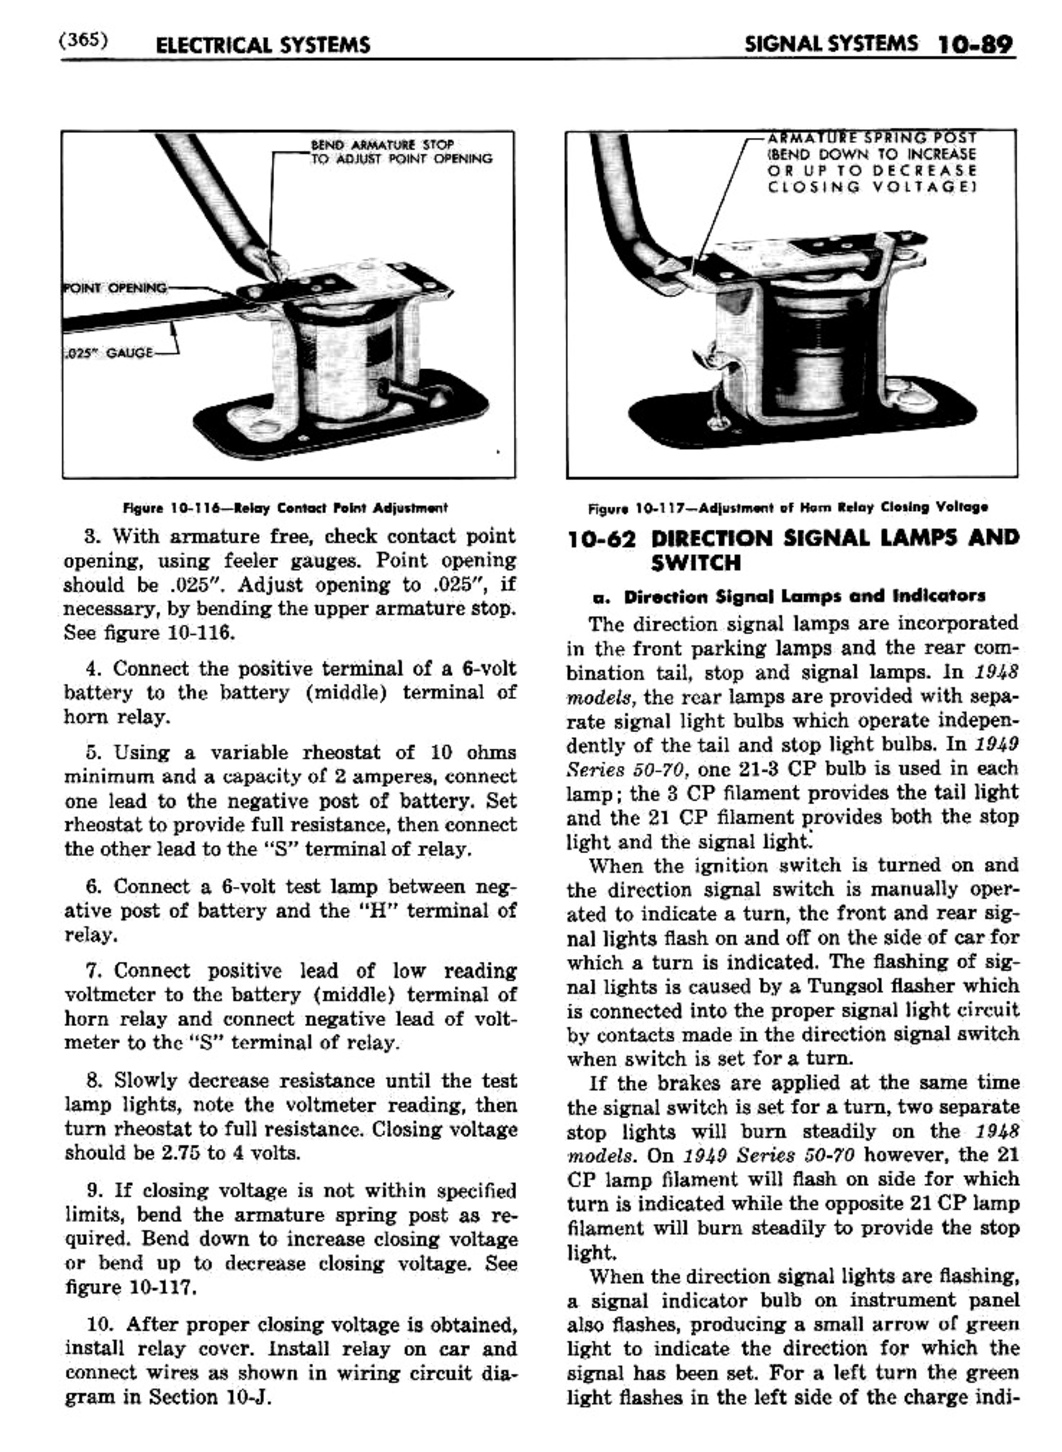 n_11 1948 Buick Shop Manual - Electrical Systems-089-089.jpg